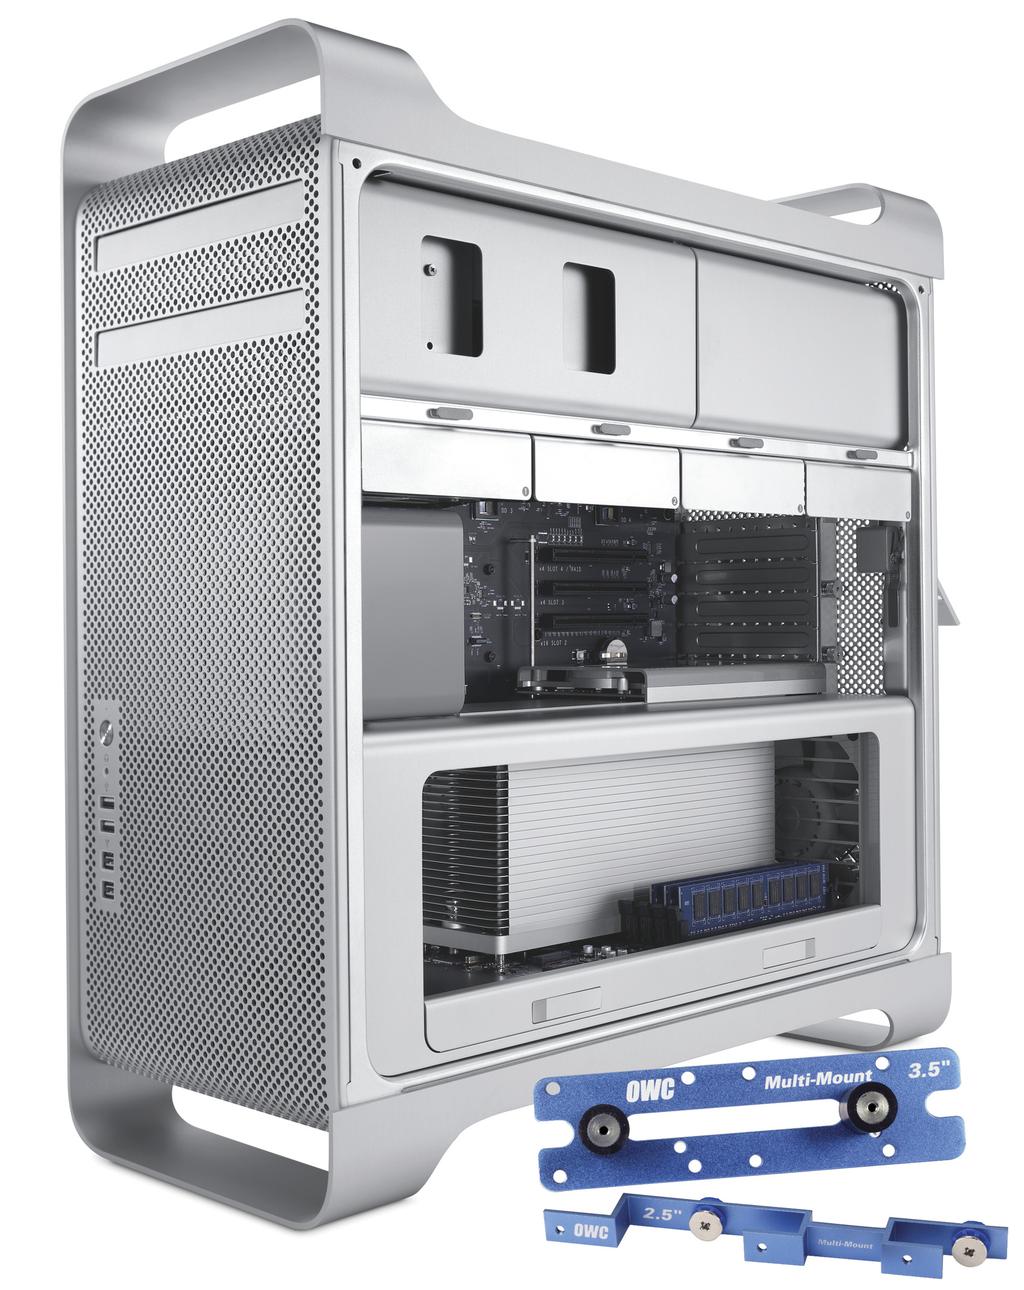 Multi-Mount for Mac Pro 2009-2010 3.5 to 5.